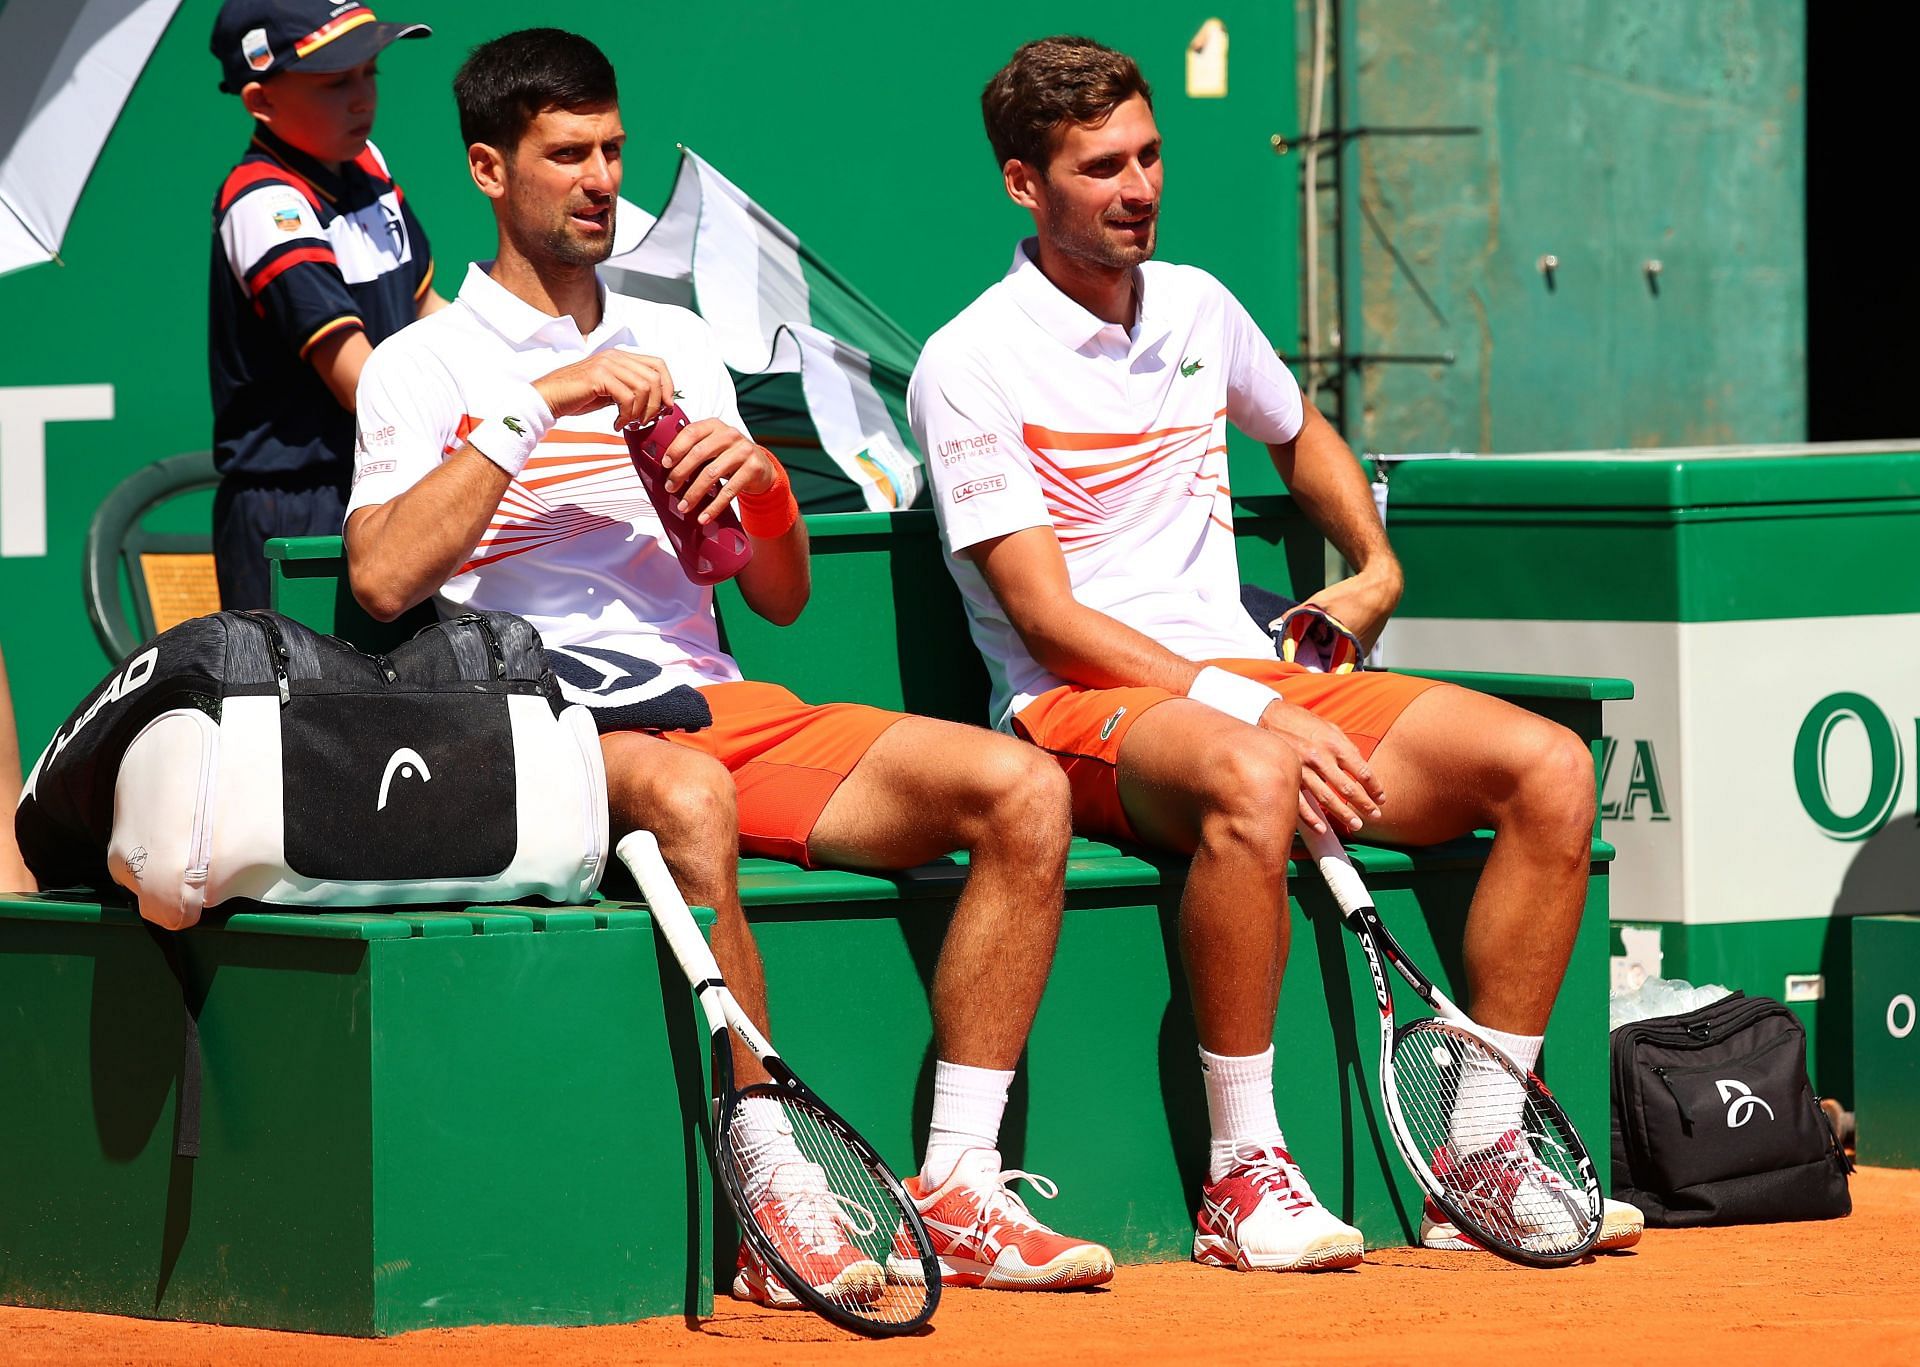 Novak and Marko pictured at 2019 Monte-Carlo Masters